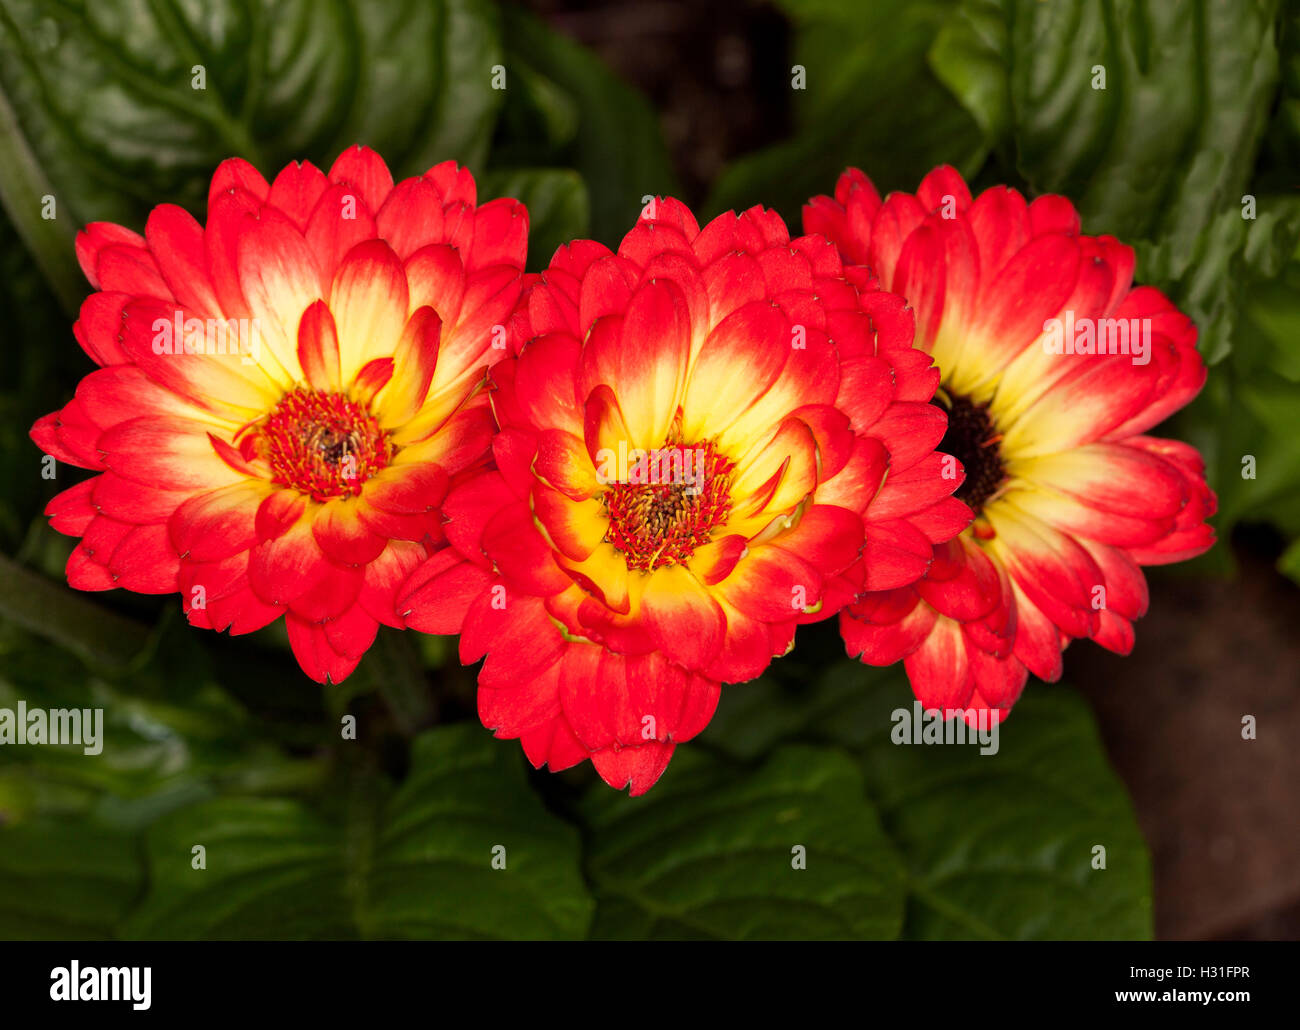 Row of three spectacular flowers of Gerbera jamesonii with vivid red petals, contrasting yellow centres and dark green leaves Stock Photo